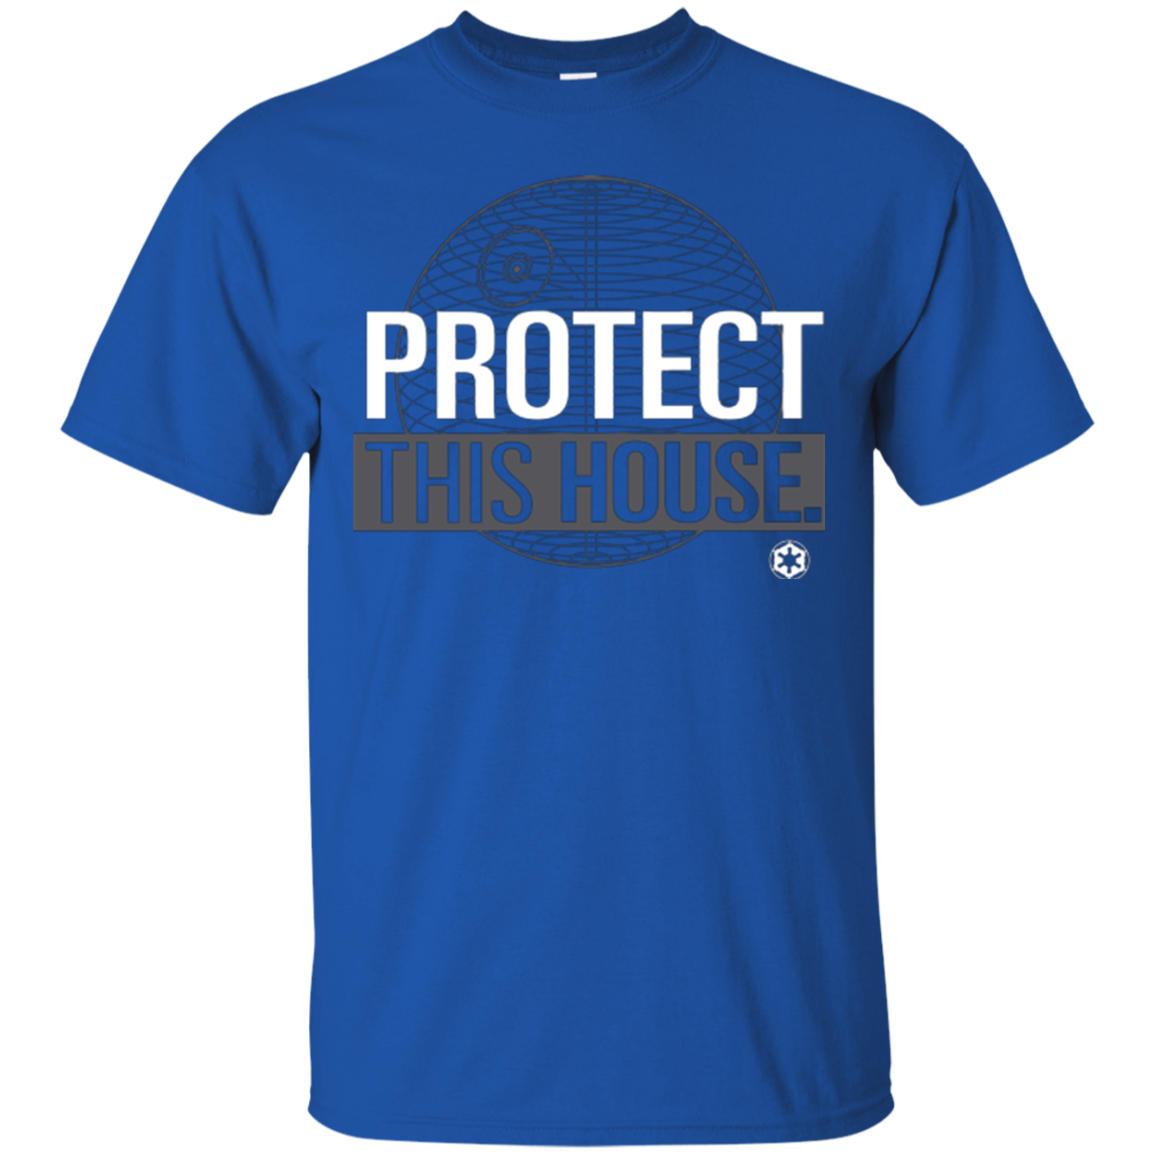 Protect This House T-Shirt – Pop Up Tee